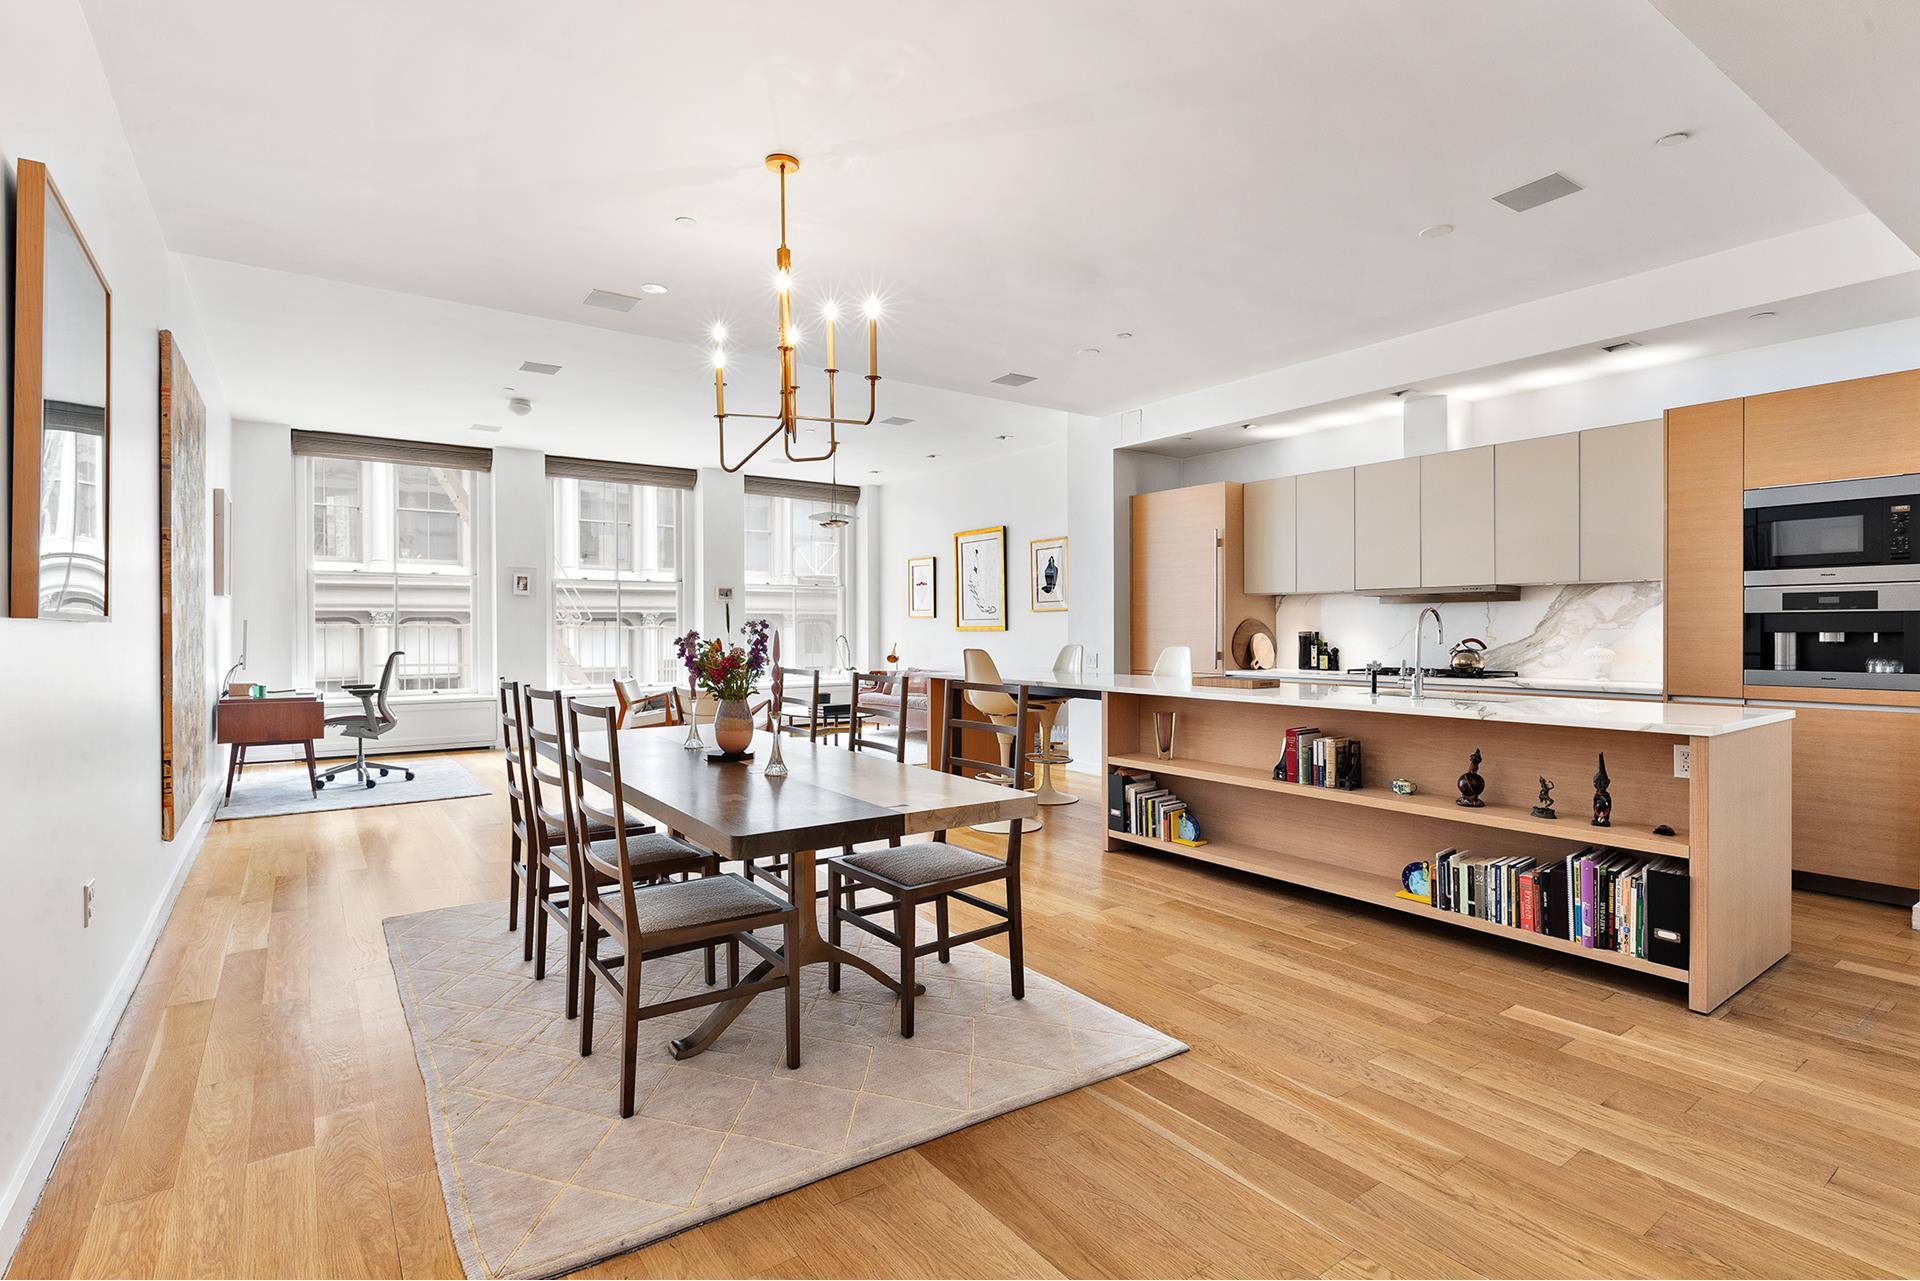 Situated just steps from the crossing of Prince and Mercer streets and The Mercer hotel, clubhouse of the world's glitterati, this rare and authentic, full floor loft condominium resplendent with ...